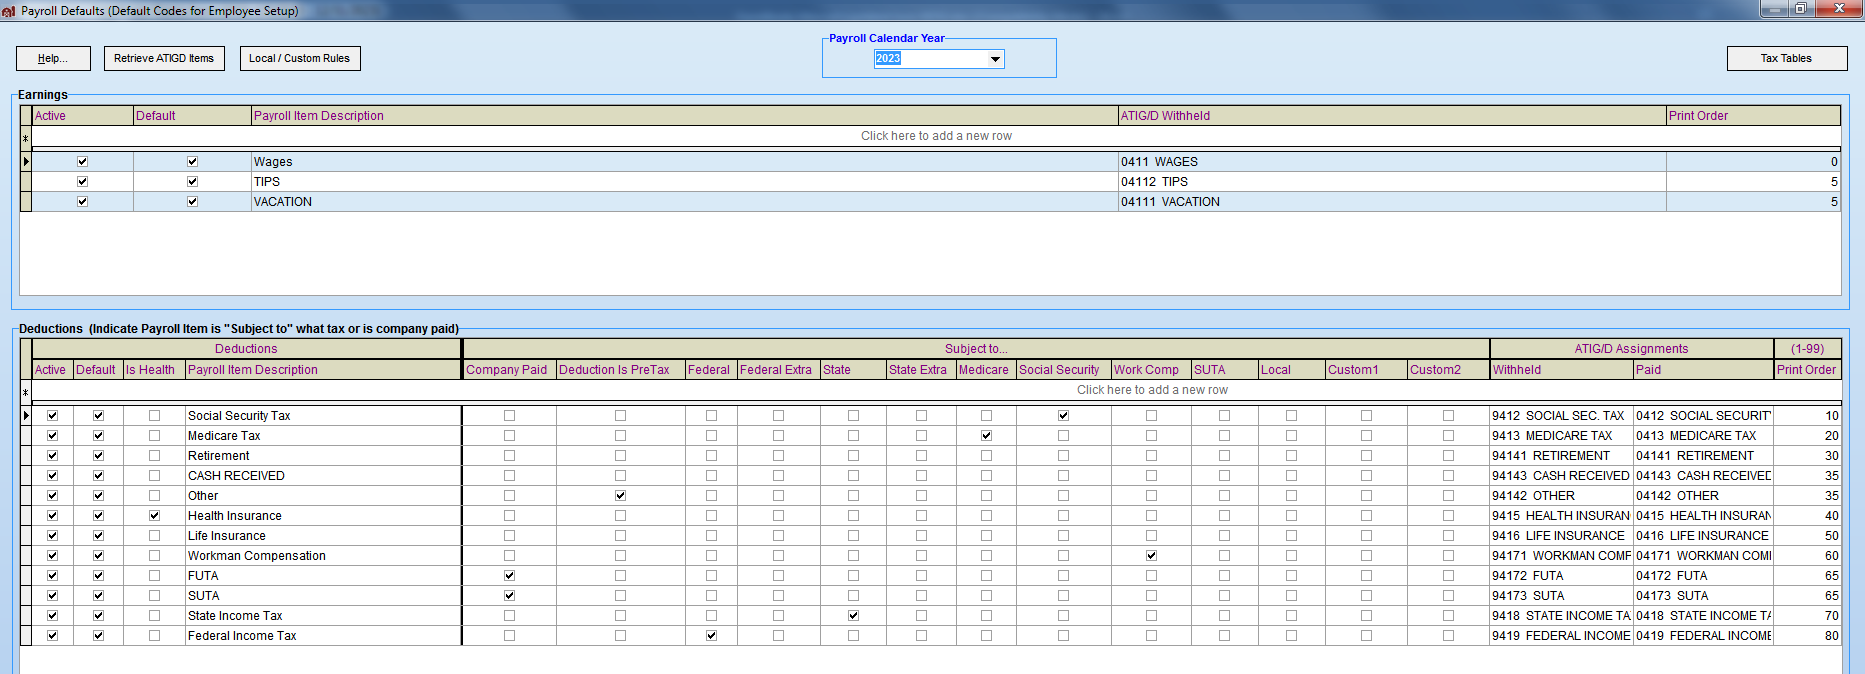 FarmBooks payroll defaults screen showing detailed list of earnings and deductions